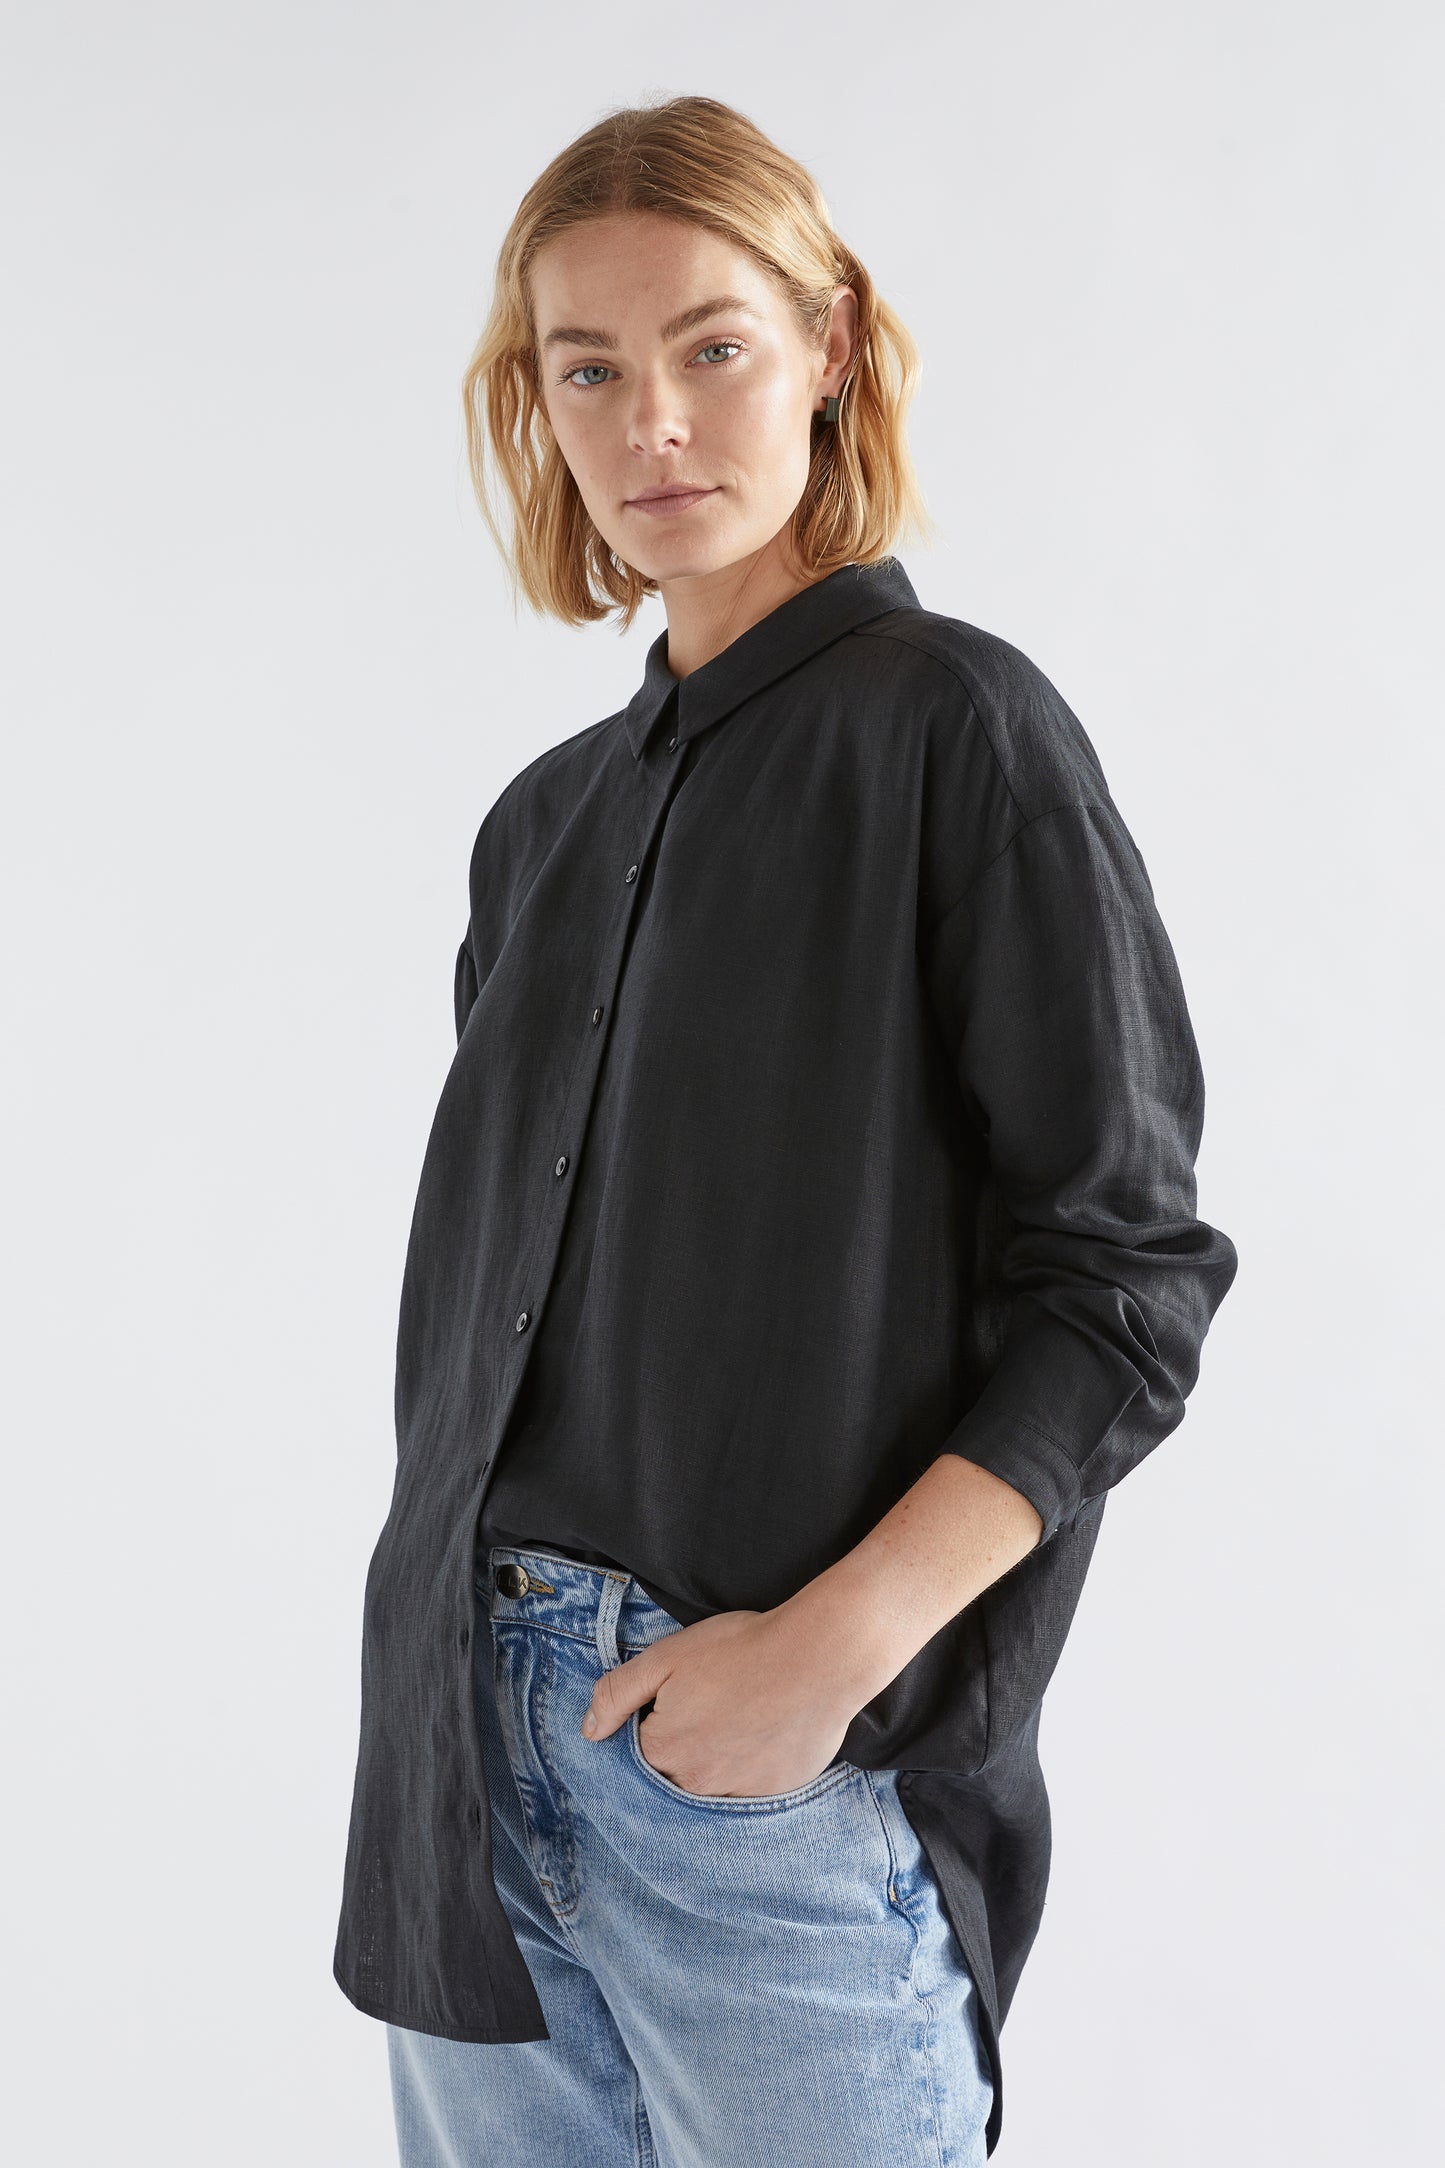 Yenna French Linen Shirt Model Front Angeled Tucked | BLACK